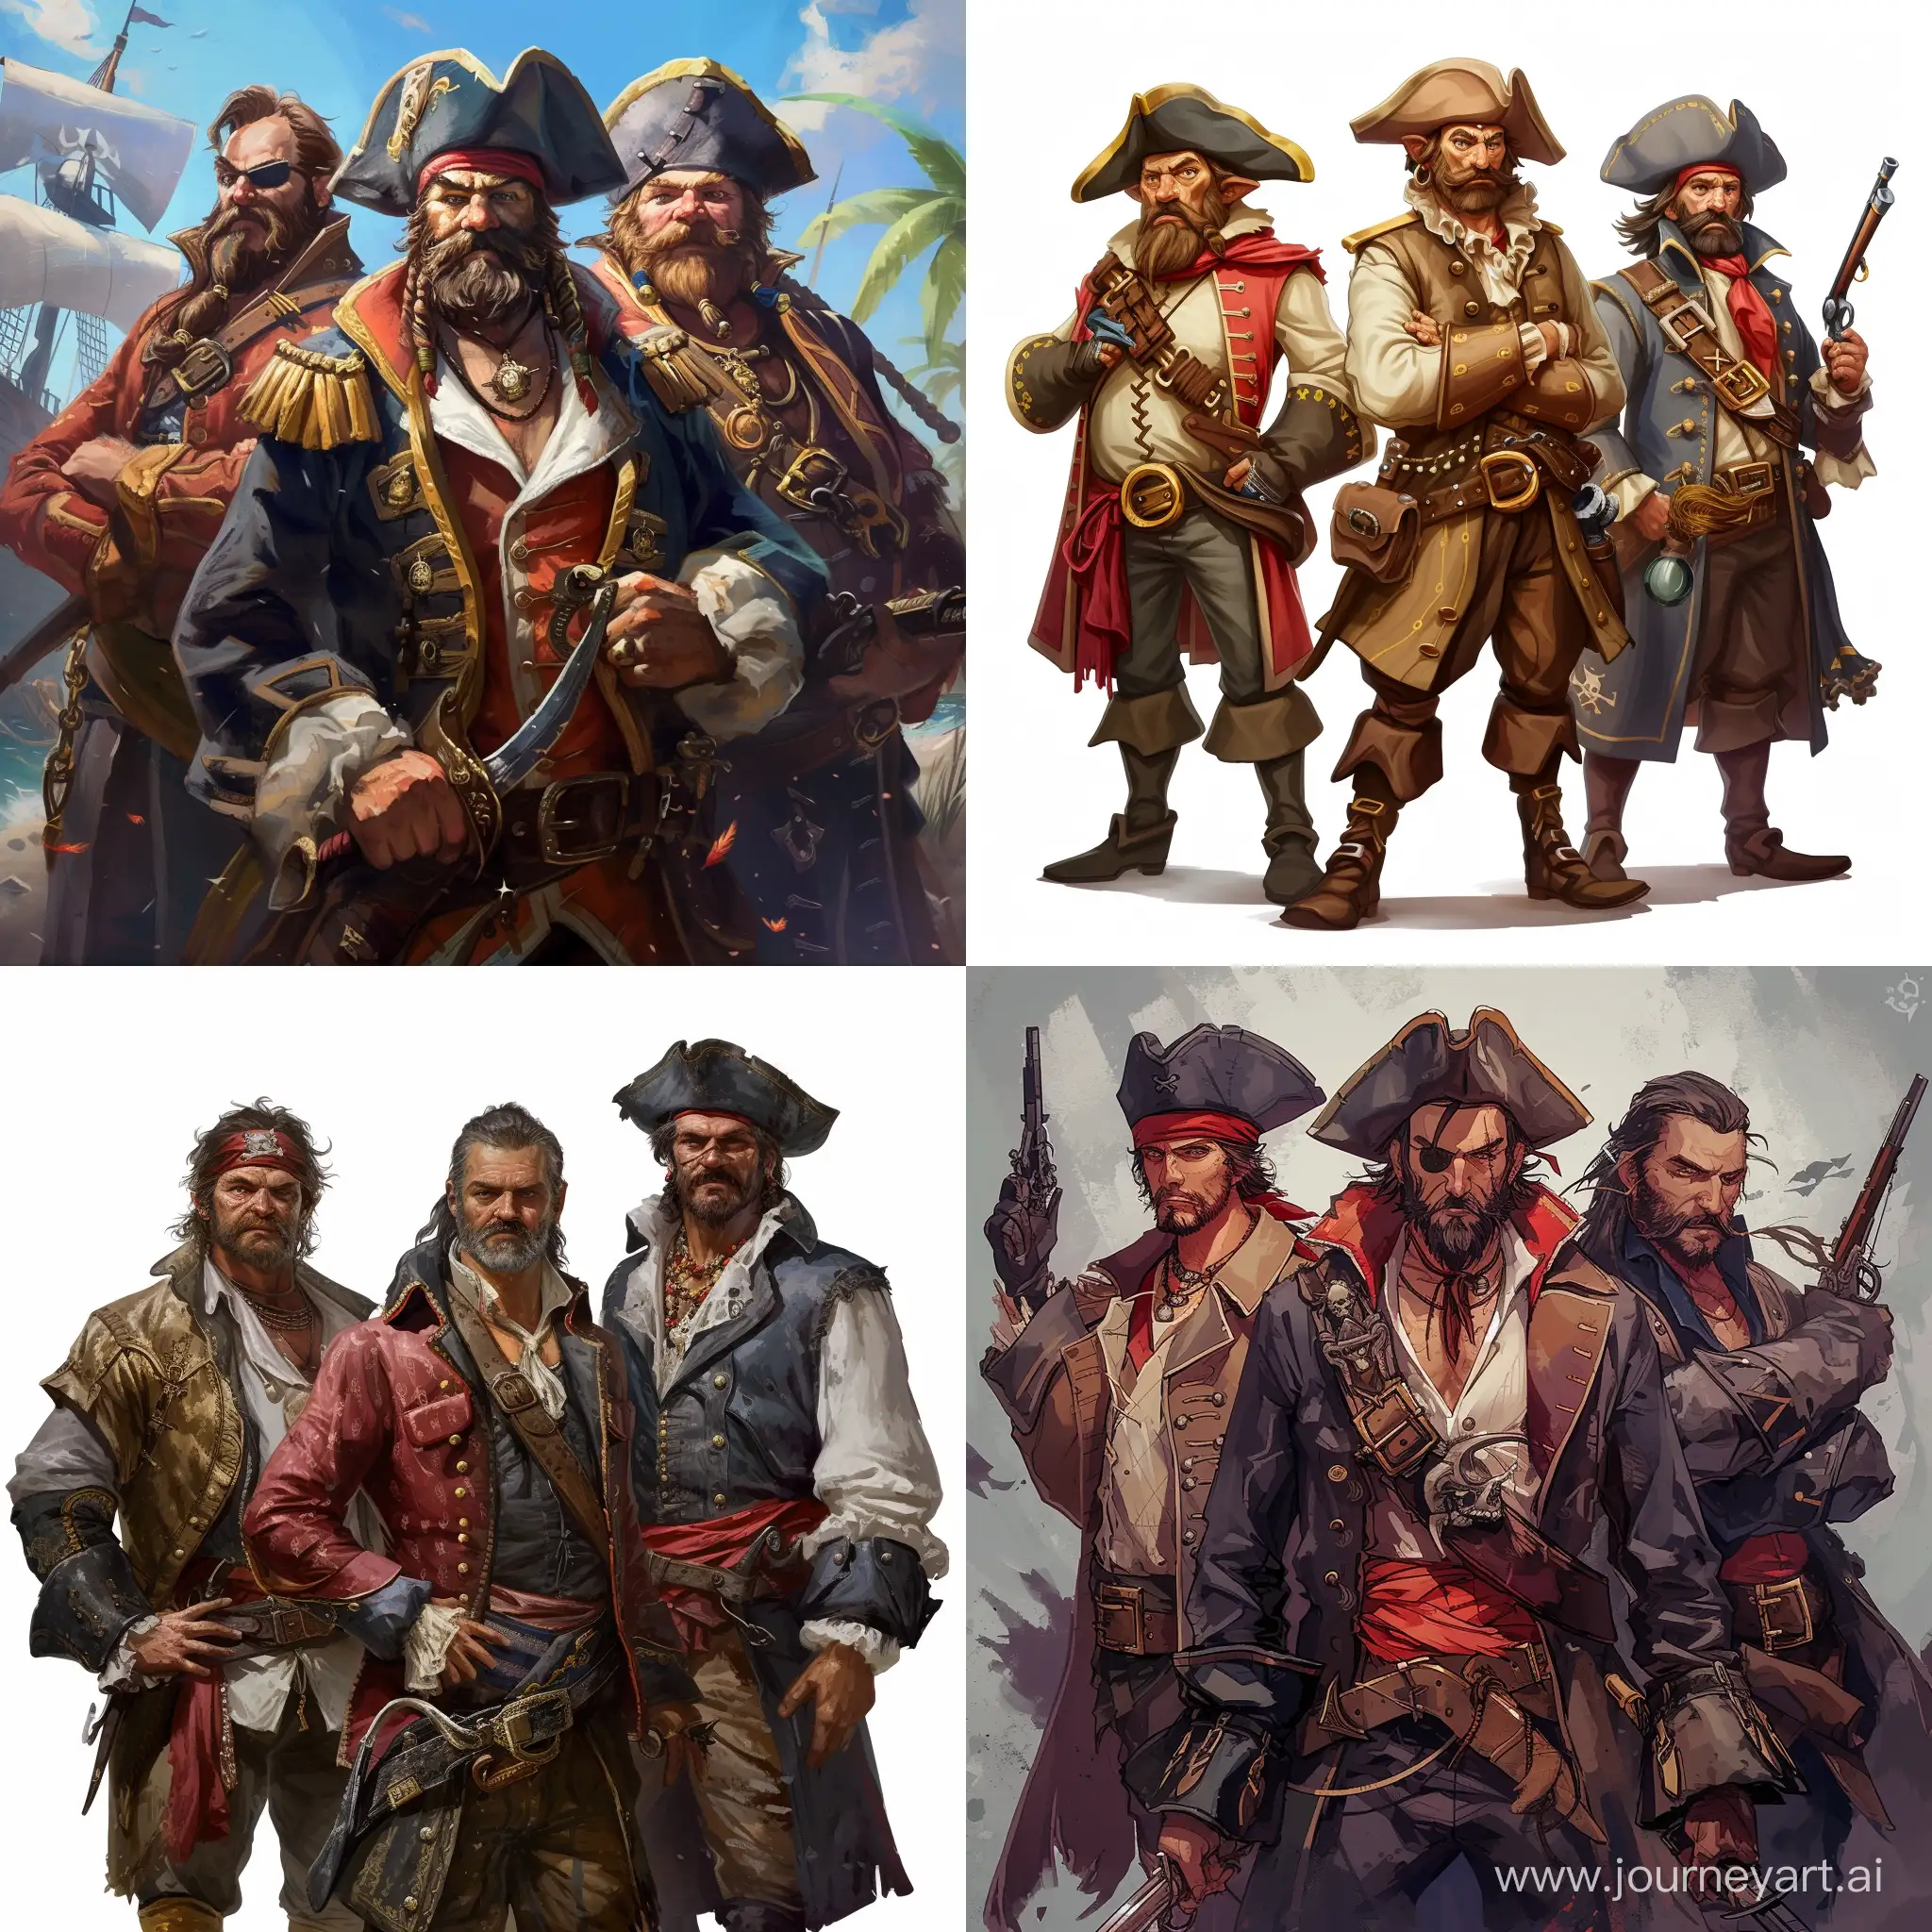 Pirate-Adventure-with-Papirosfin-and-Deputy-Captain-Kovriginf